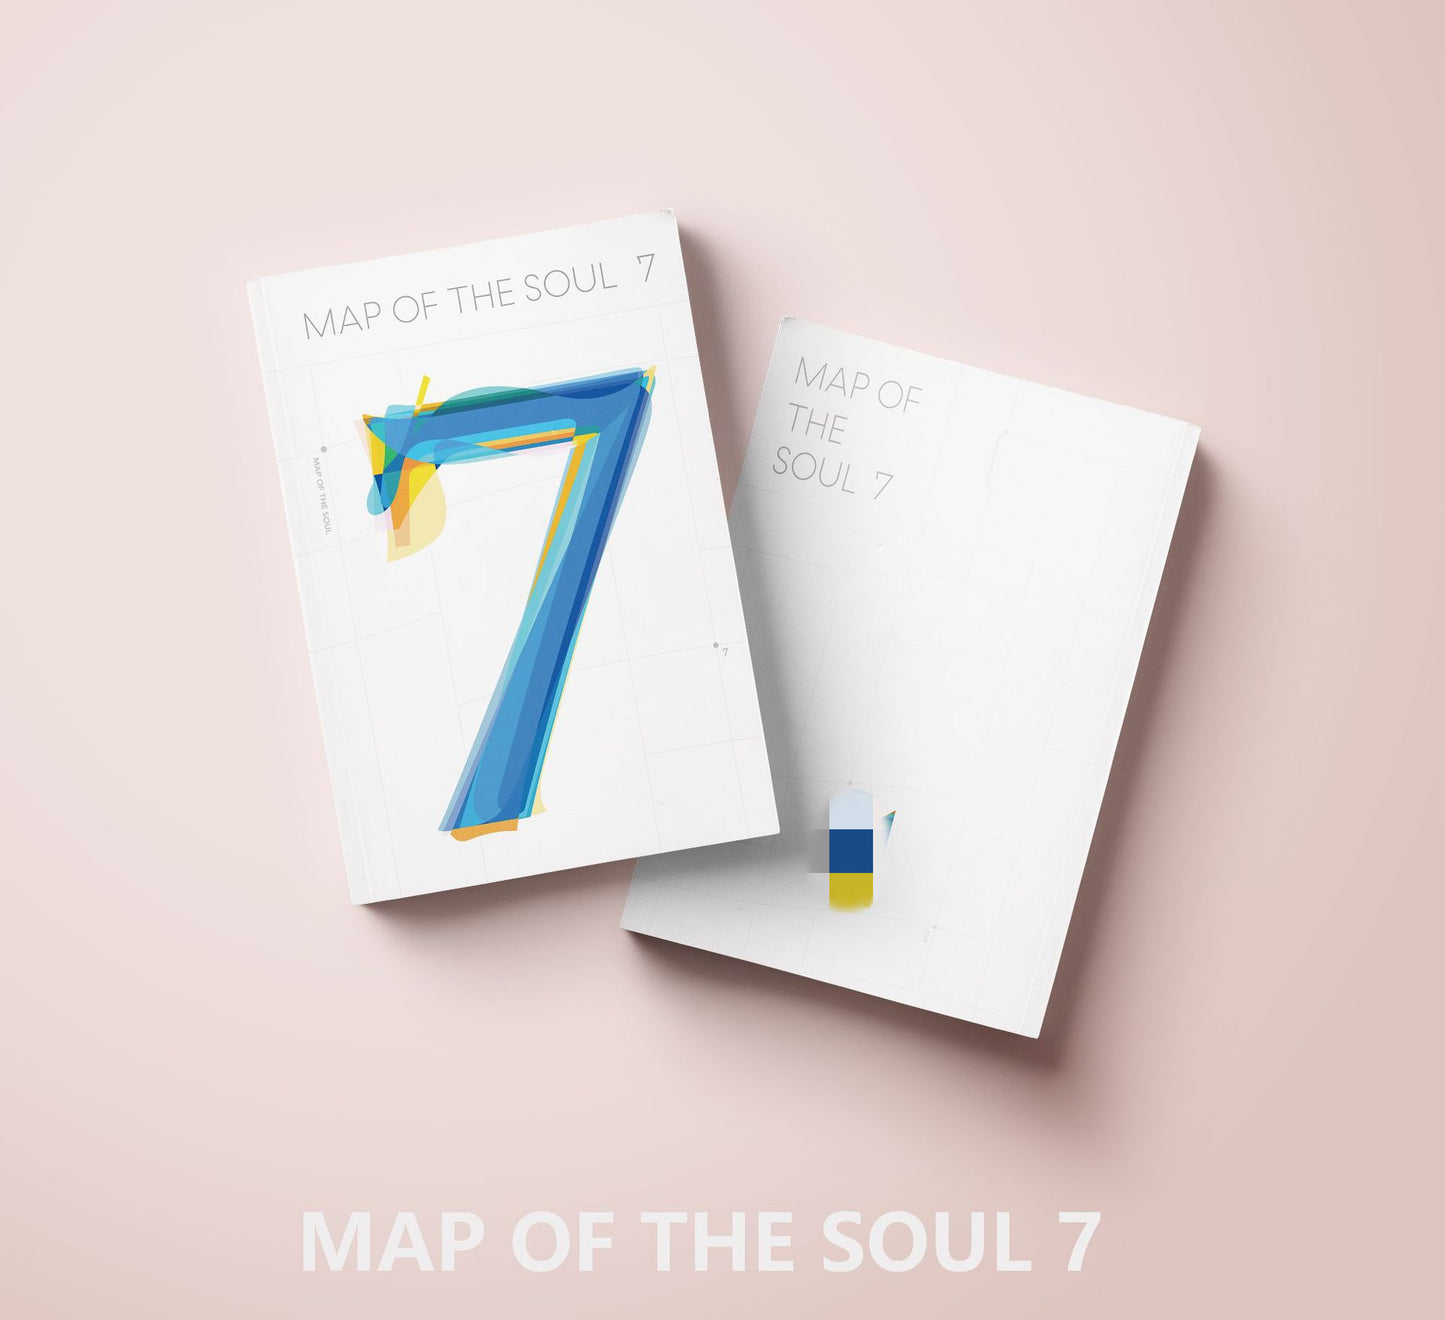 BTS MAP OF THE SOUL MINI PHOTO BOOK